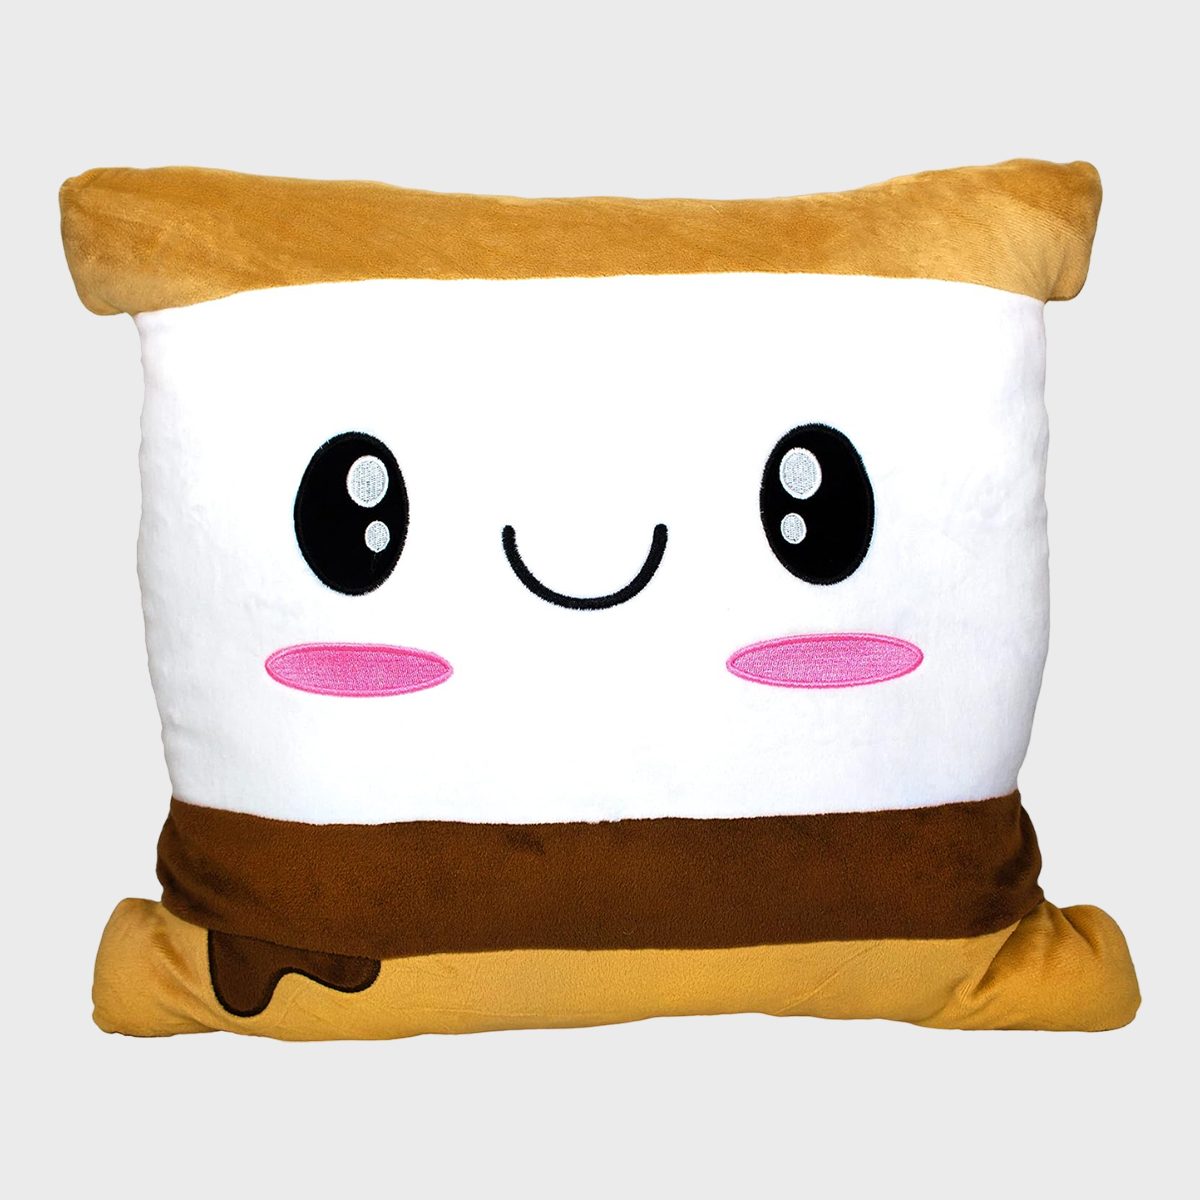 <p>Girls of all ages will appreciate snuggling with one of these ultra-soft and delightfully <a href="https://www.amazon.com/Scentco-Smillow-Scented-Kawaii-Pillow/dp/B01BZDRQZM" rel="noopener noreferrer">scented pillows</a>. Deliciously scented microbeads are sewn right into the stuffing and should hold their smell for at least two years. There are over a dozen scents and adorable characters to choose from, making these some of the <a href="https://www.rd.com/article/best-pillows/" rel="noopener noreferrer">best pillows</a> we've ever seen!</p> <p class="listicle-page__cta-button-shop"><a class="shop-btn" href="https://www.amazon.com/Scentco-Smillow-Scented-Kawaii-Pillow/dp/B01BZDRQZM/">Shop Now</a></p>